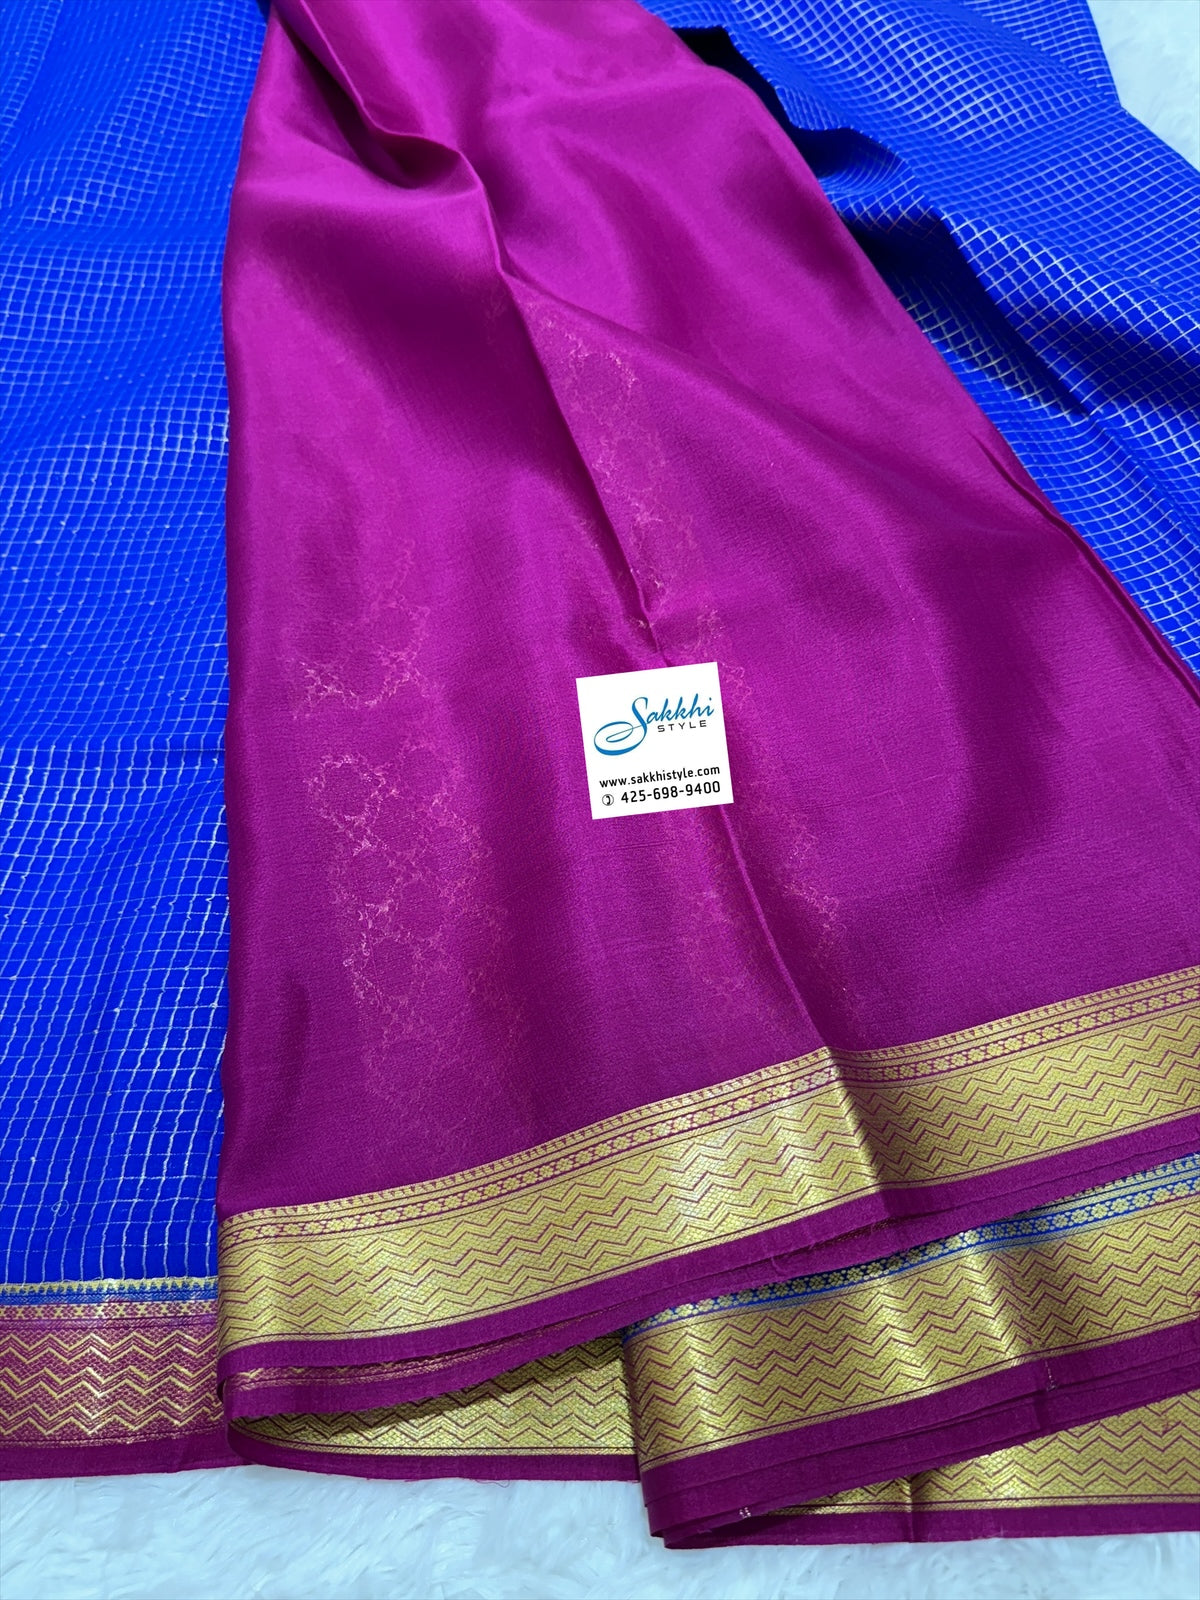 PURE MYSORE SILK SAREE IN BLEND OF ROYAL BLUE AND PURPLE HUES